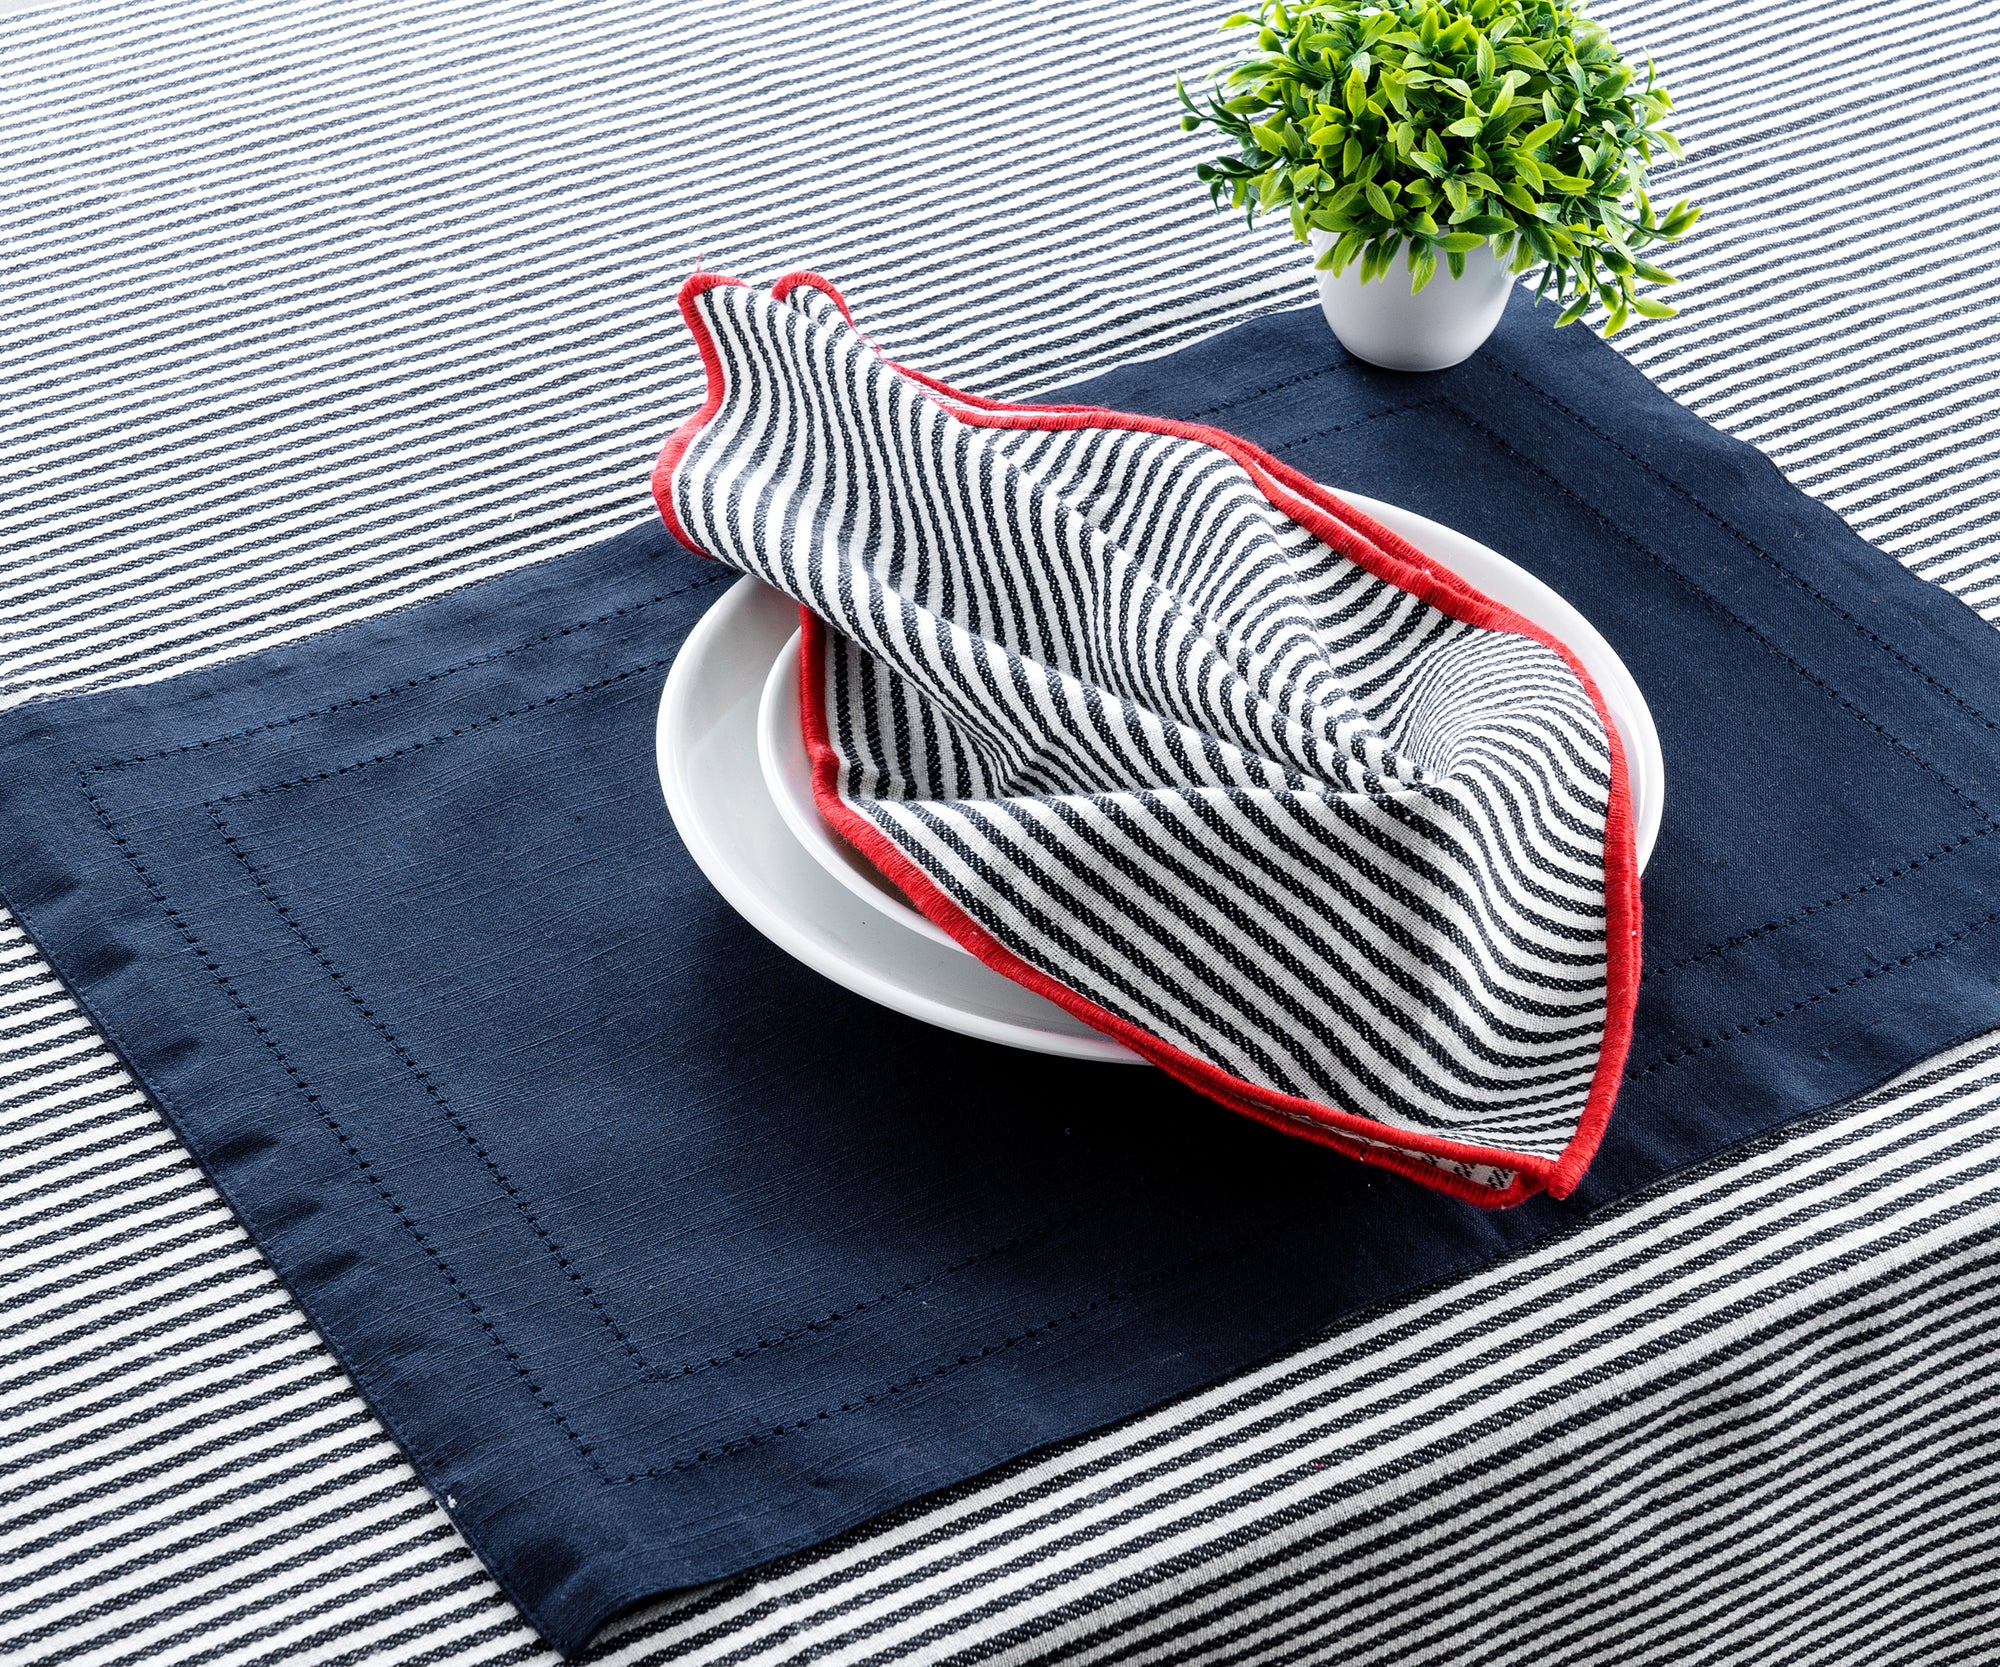 Different Types of Placemats with a Tablecloth